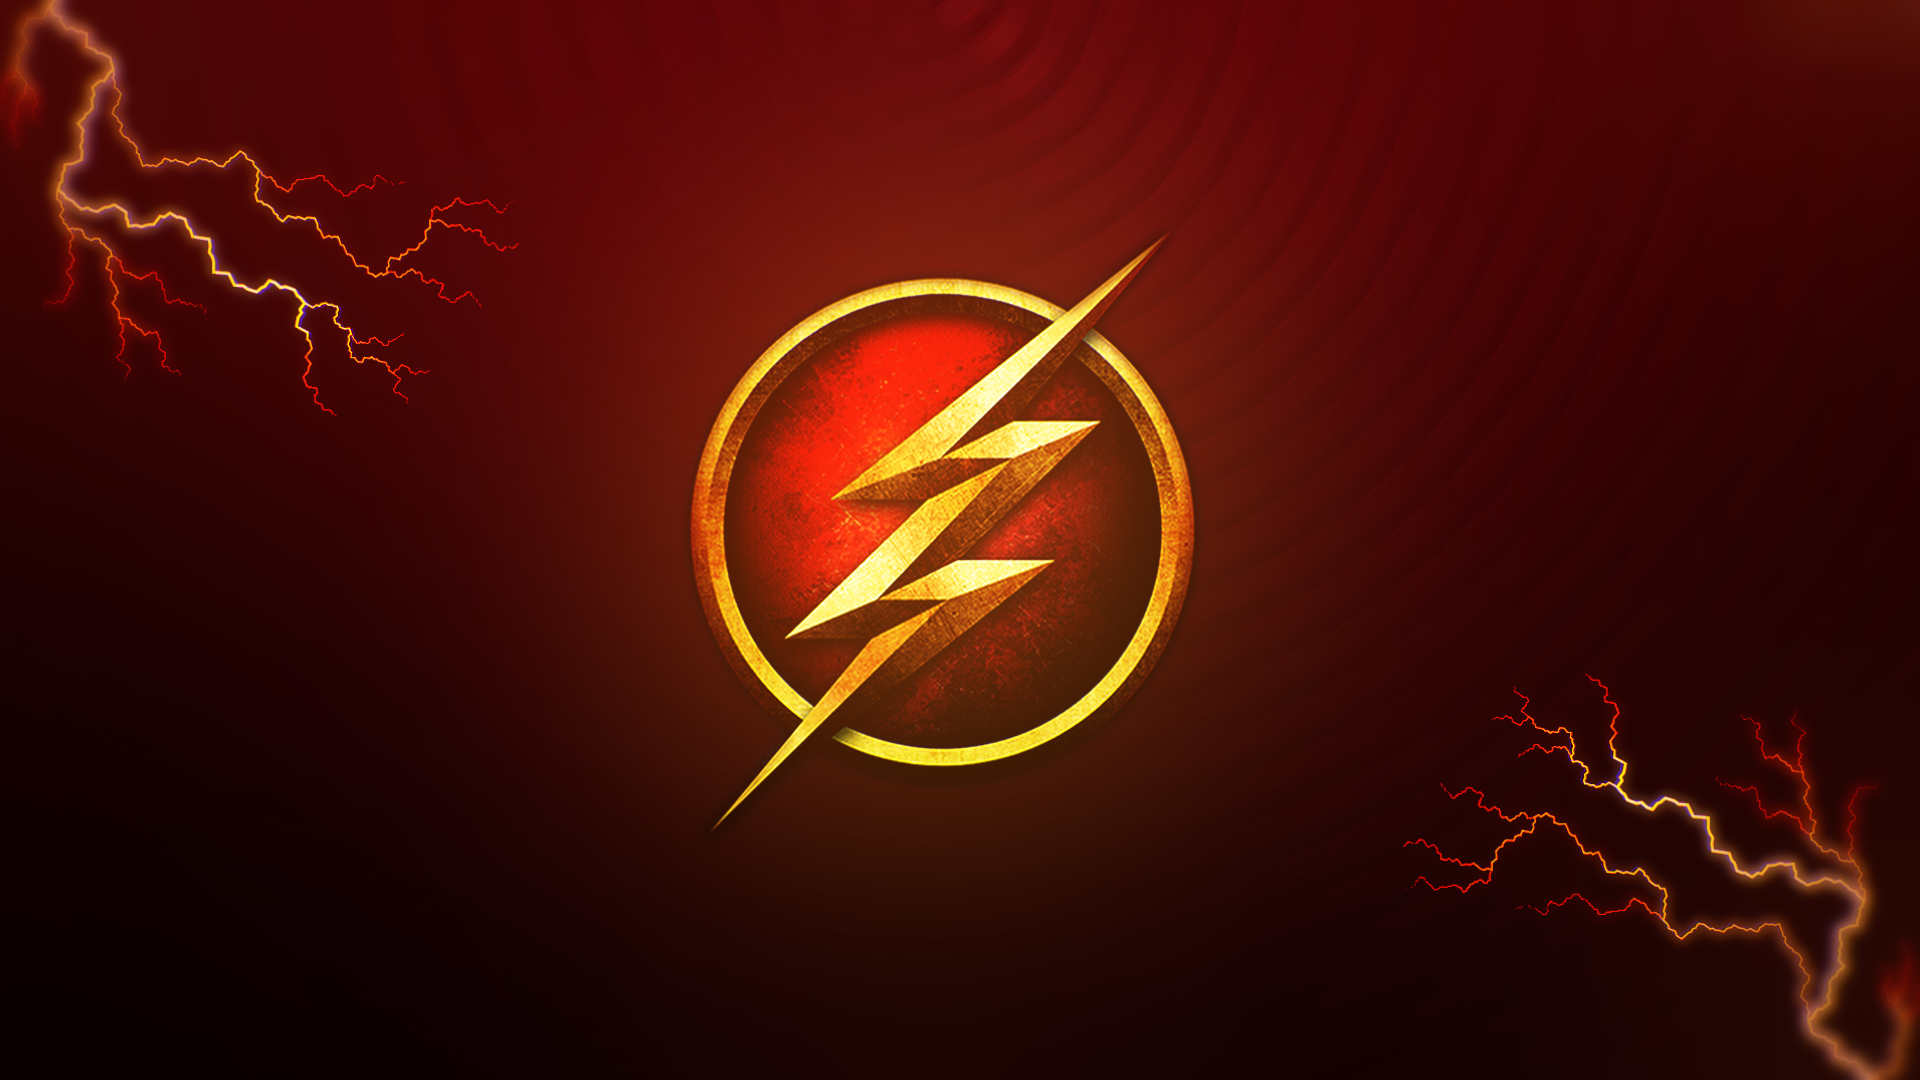 The Flash Wallpaper Wallpaper The Flash, Grant Gustin, - Flash Wall Paper , HD Wallpaper & Backgrounds